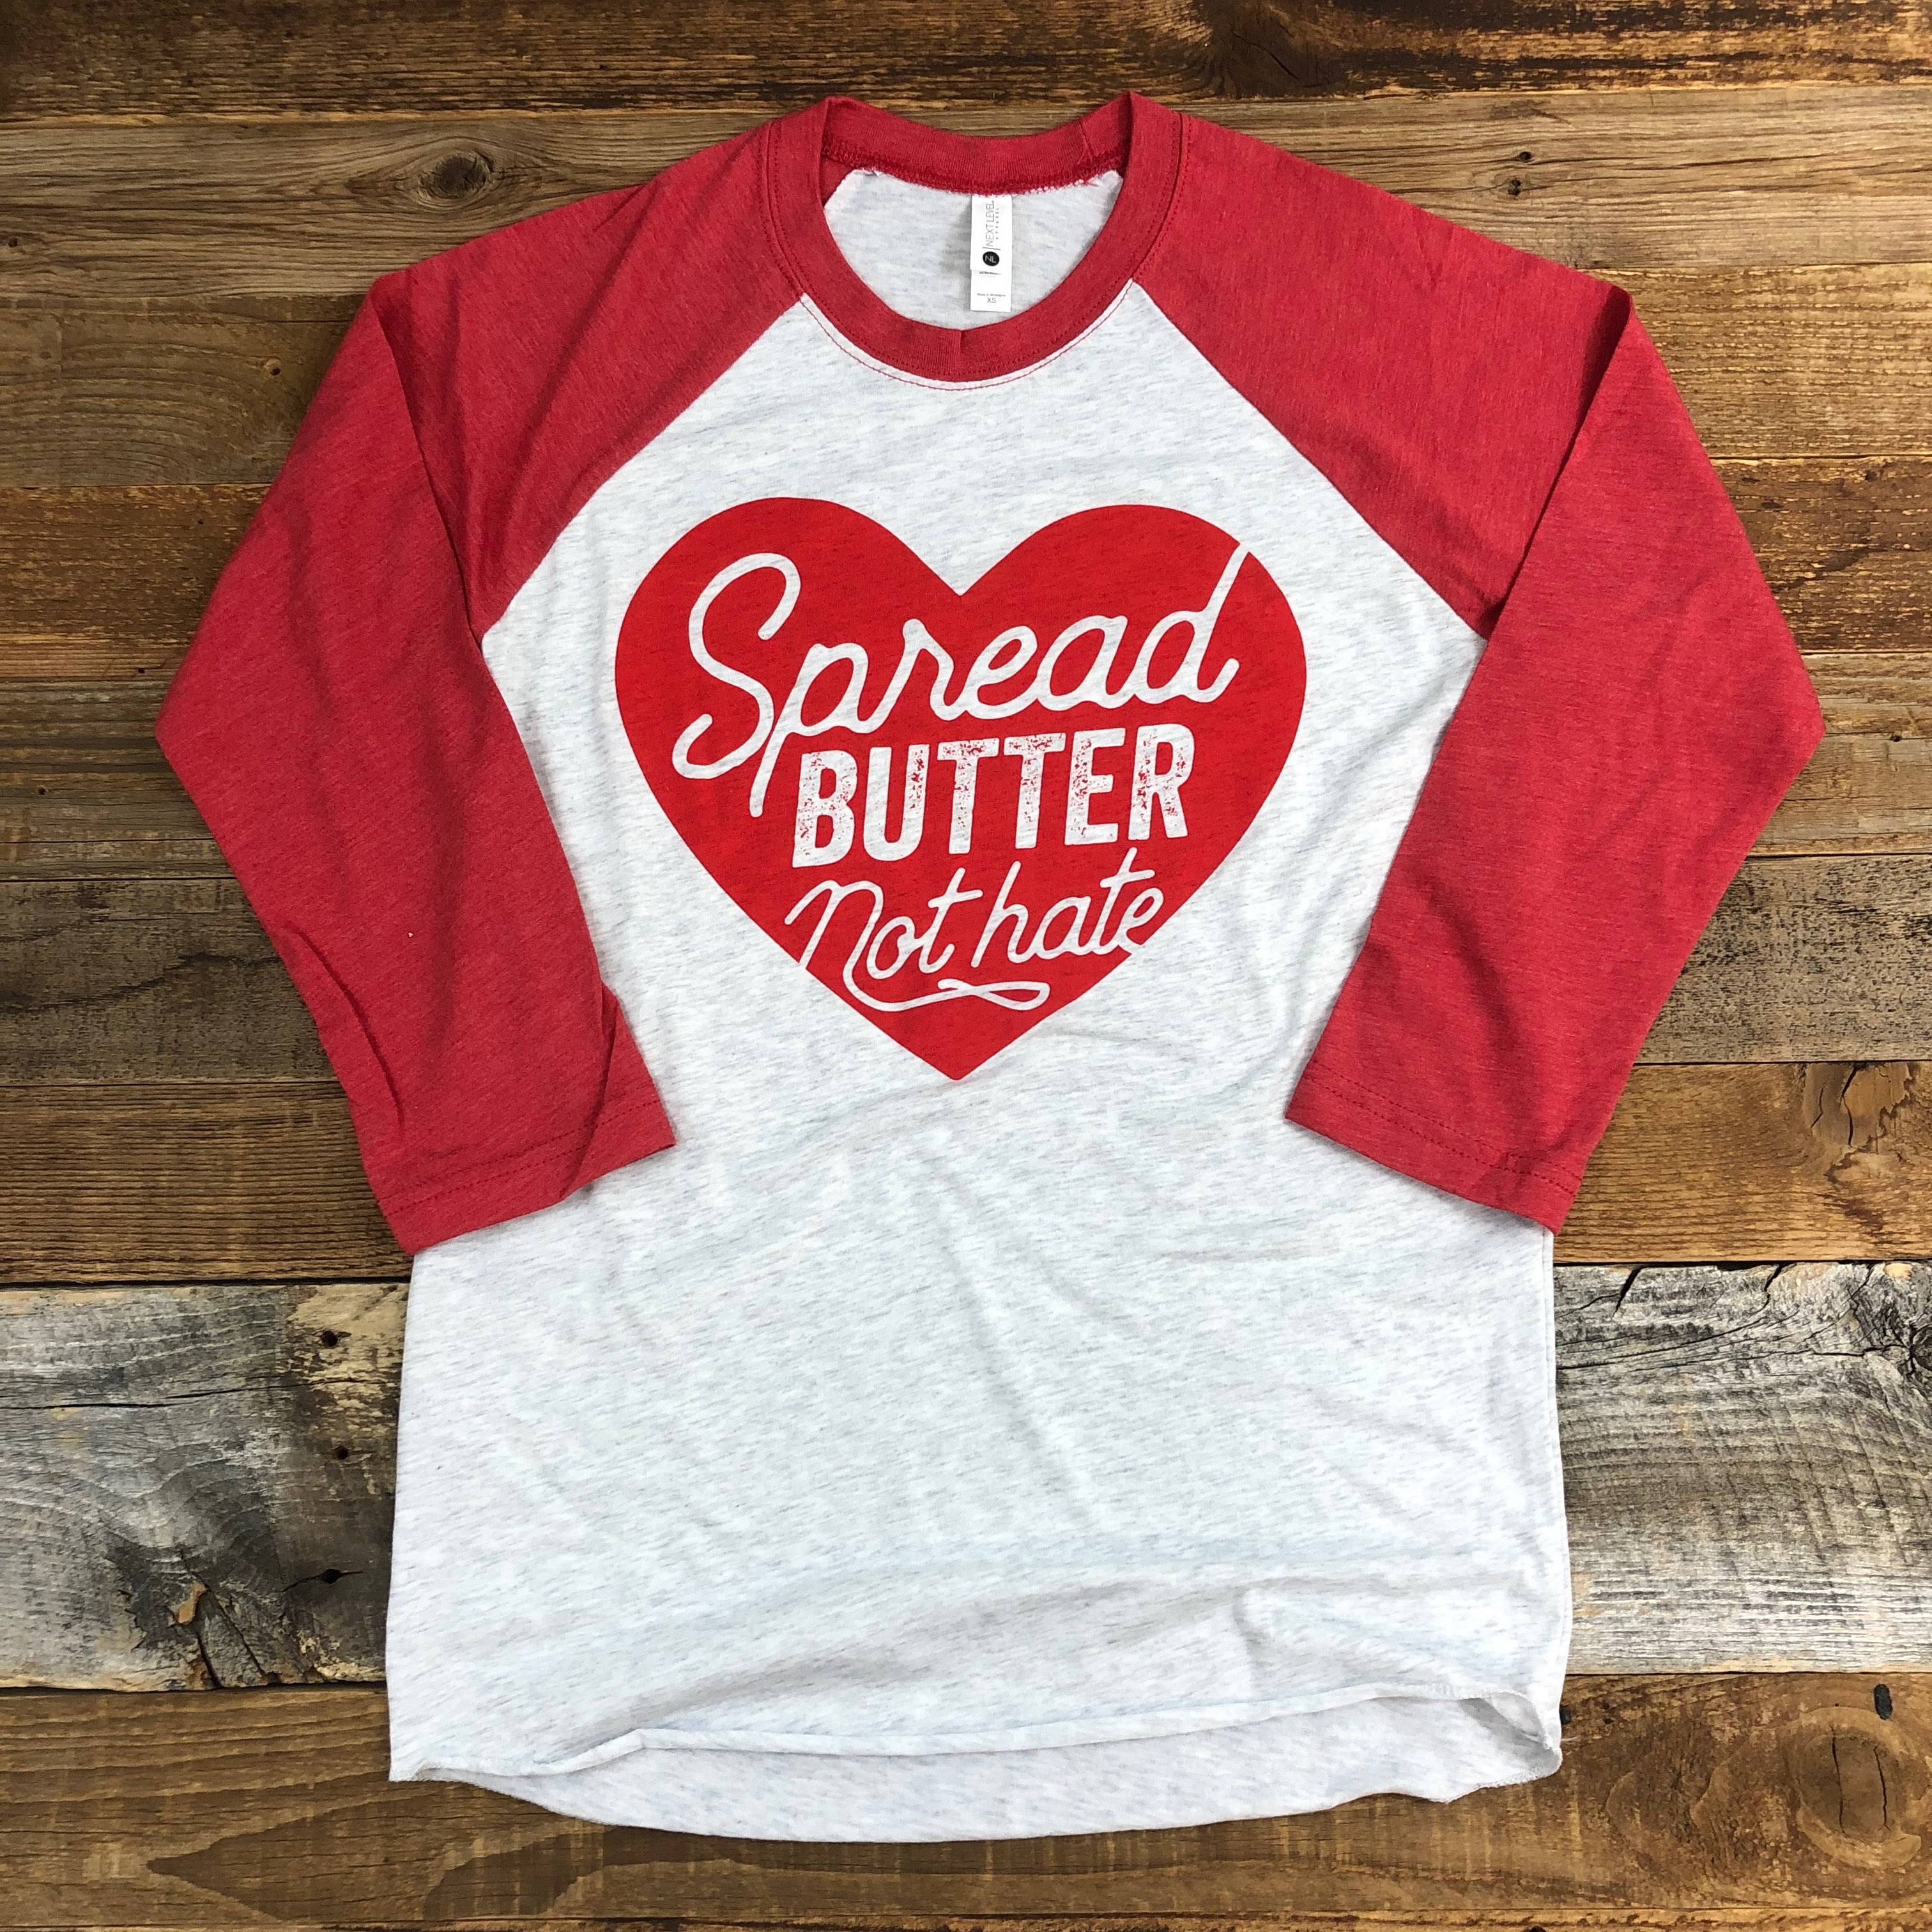 UNISEX Spread Butter, Not Hate Baseball Tee - Red | This Farm Wife